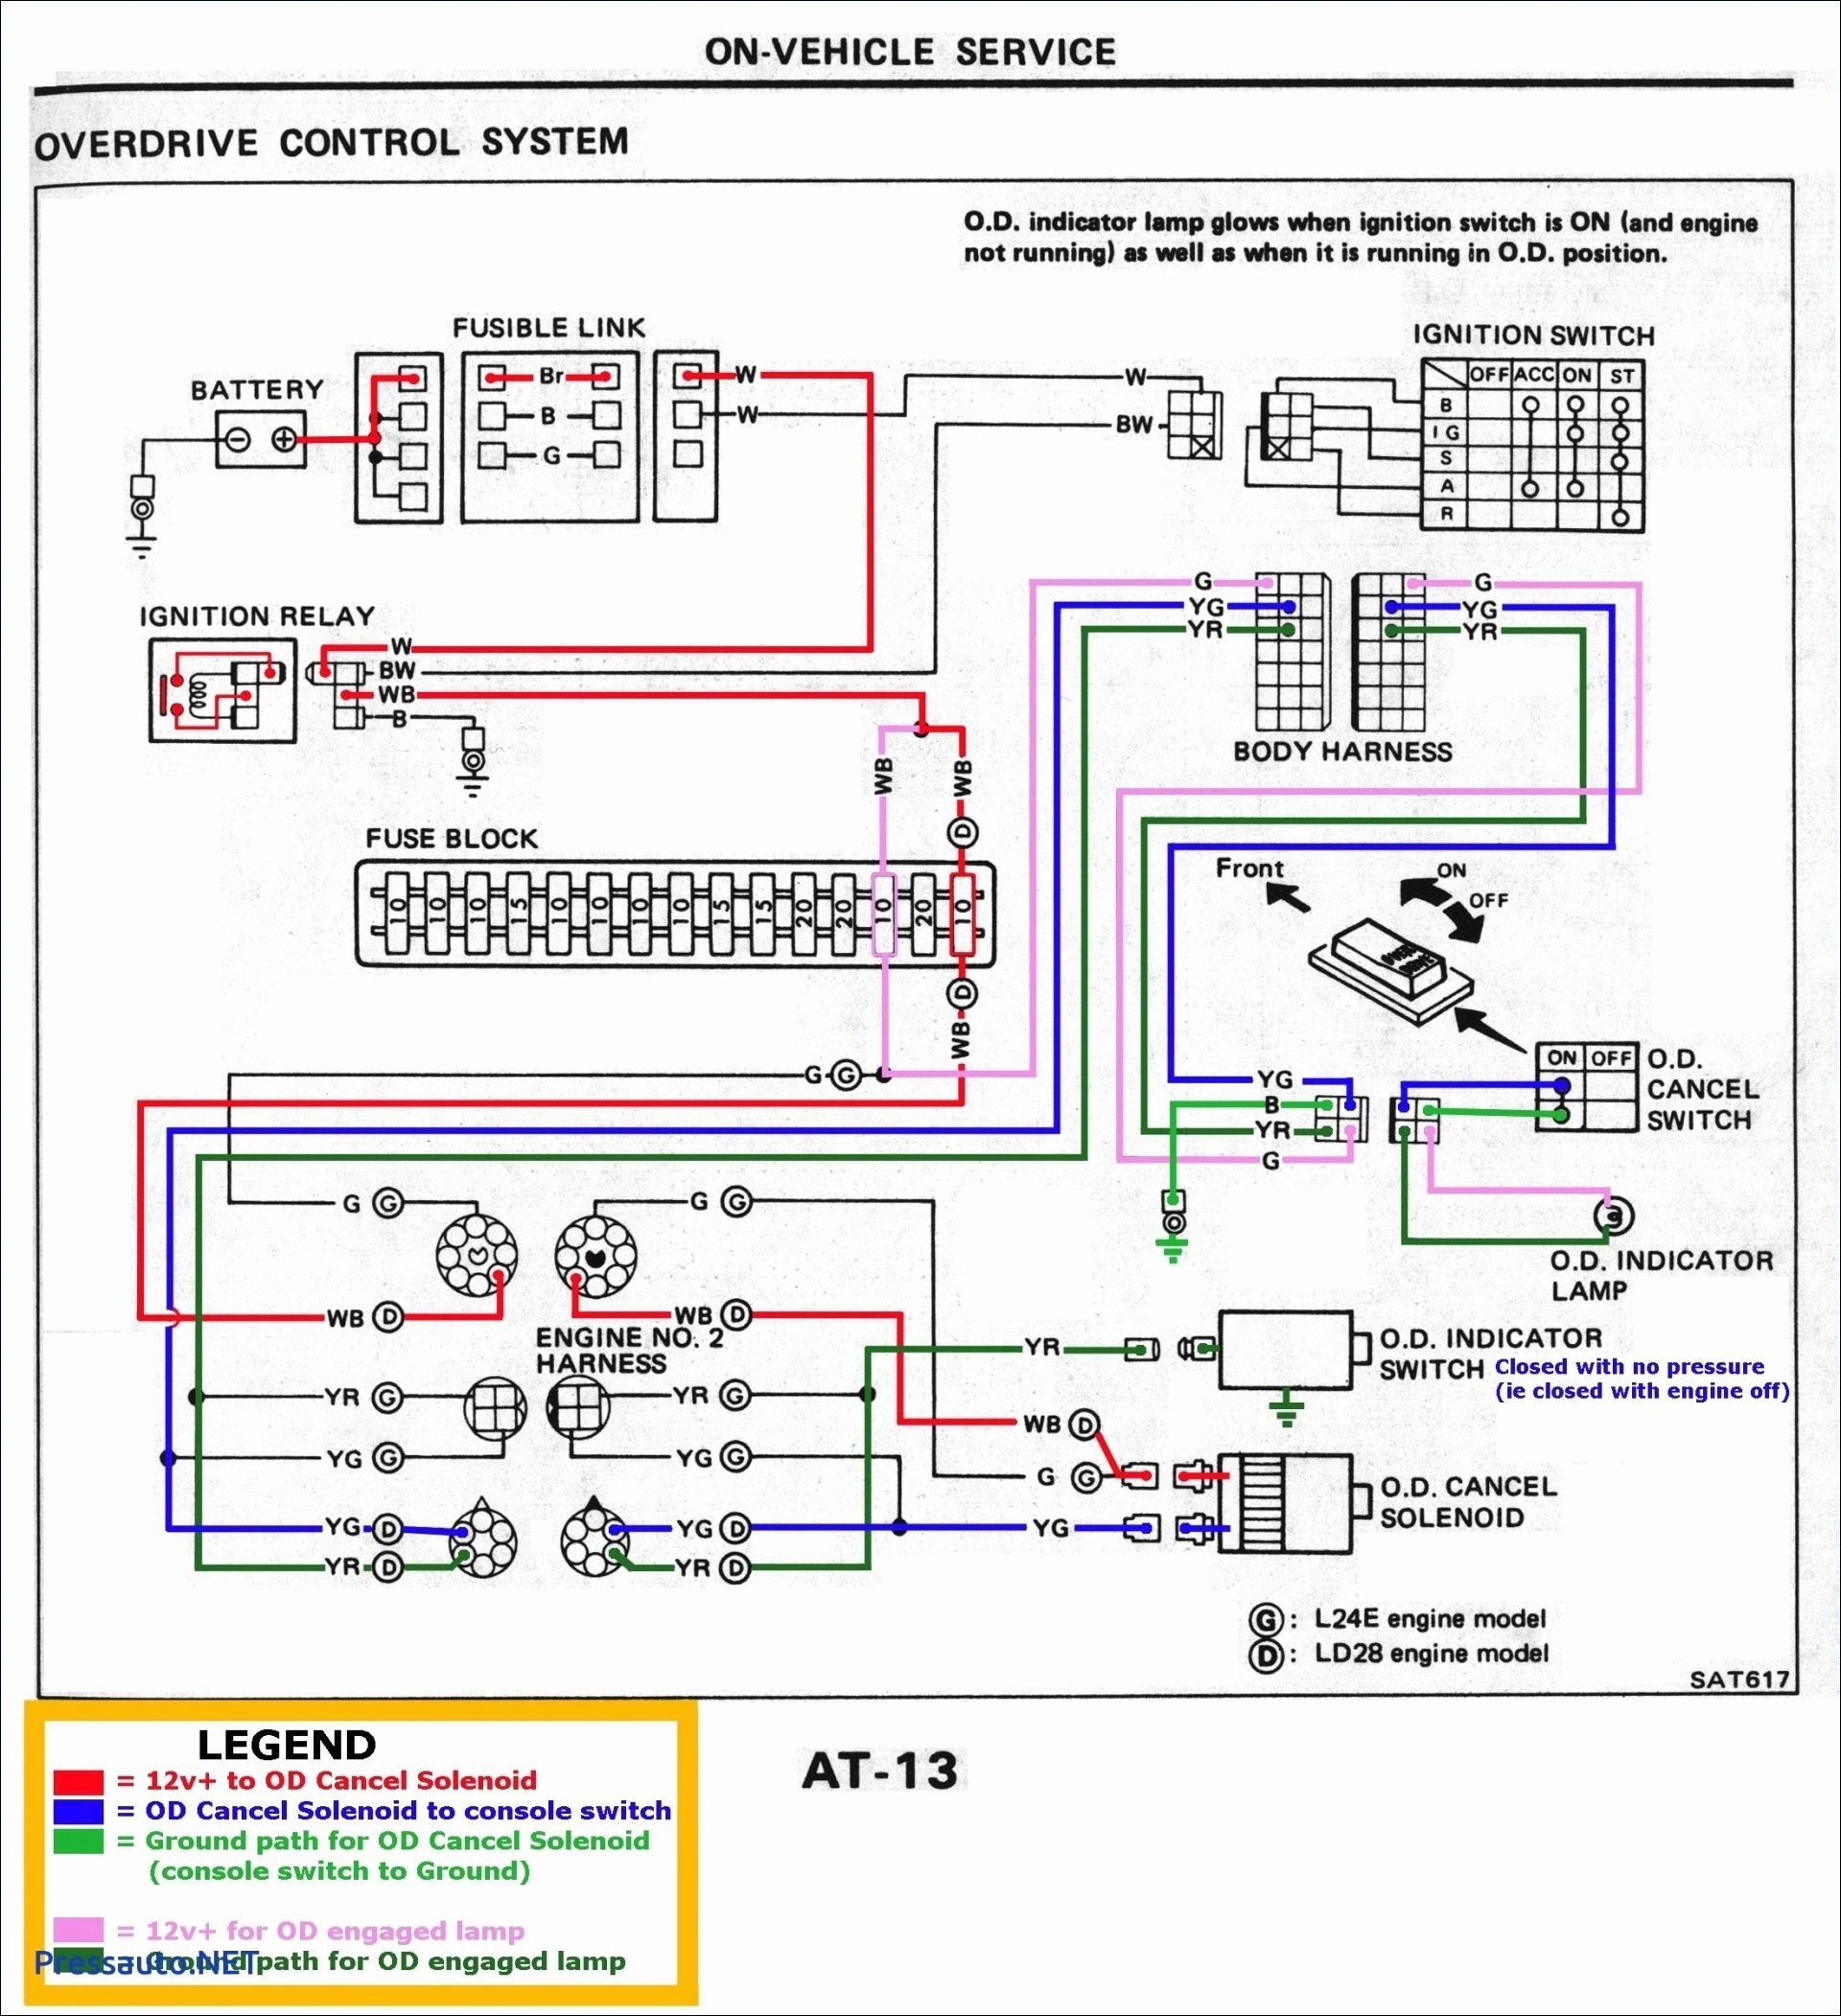 Wiring Diagram for 5 Way Guitar Switch Best Wiring Diagram 5 Way Switch Wiring Diagram Light